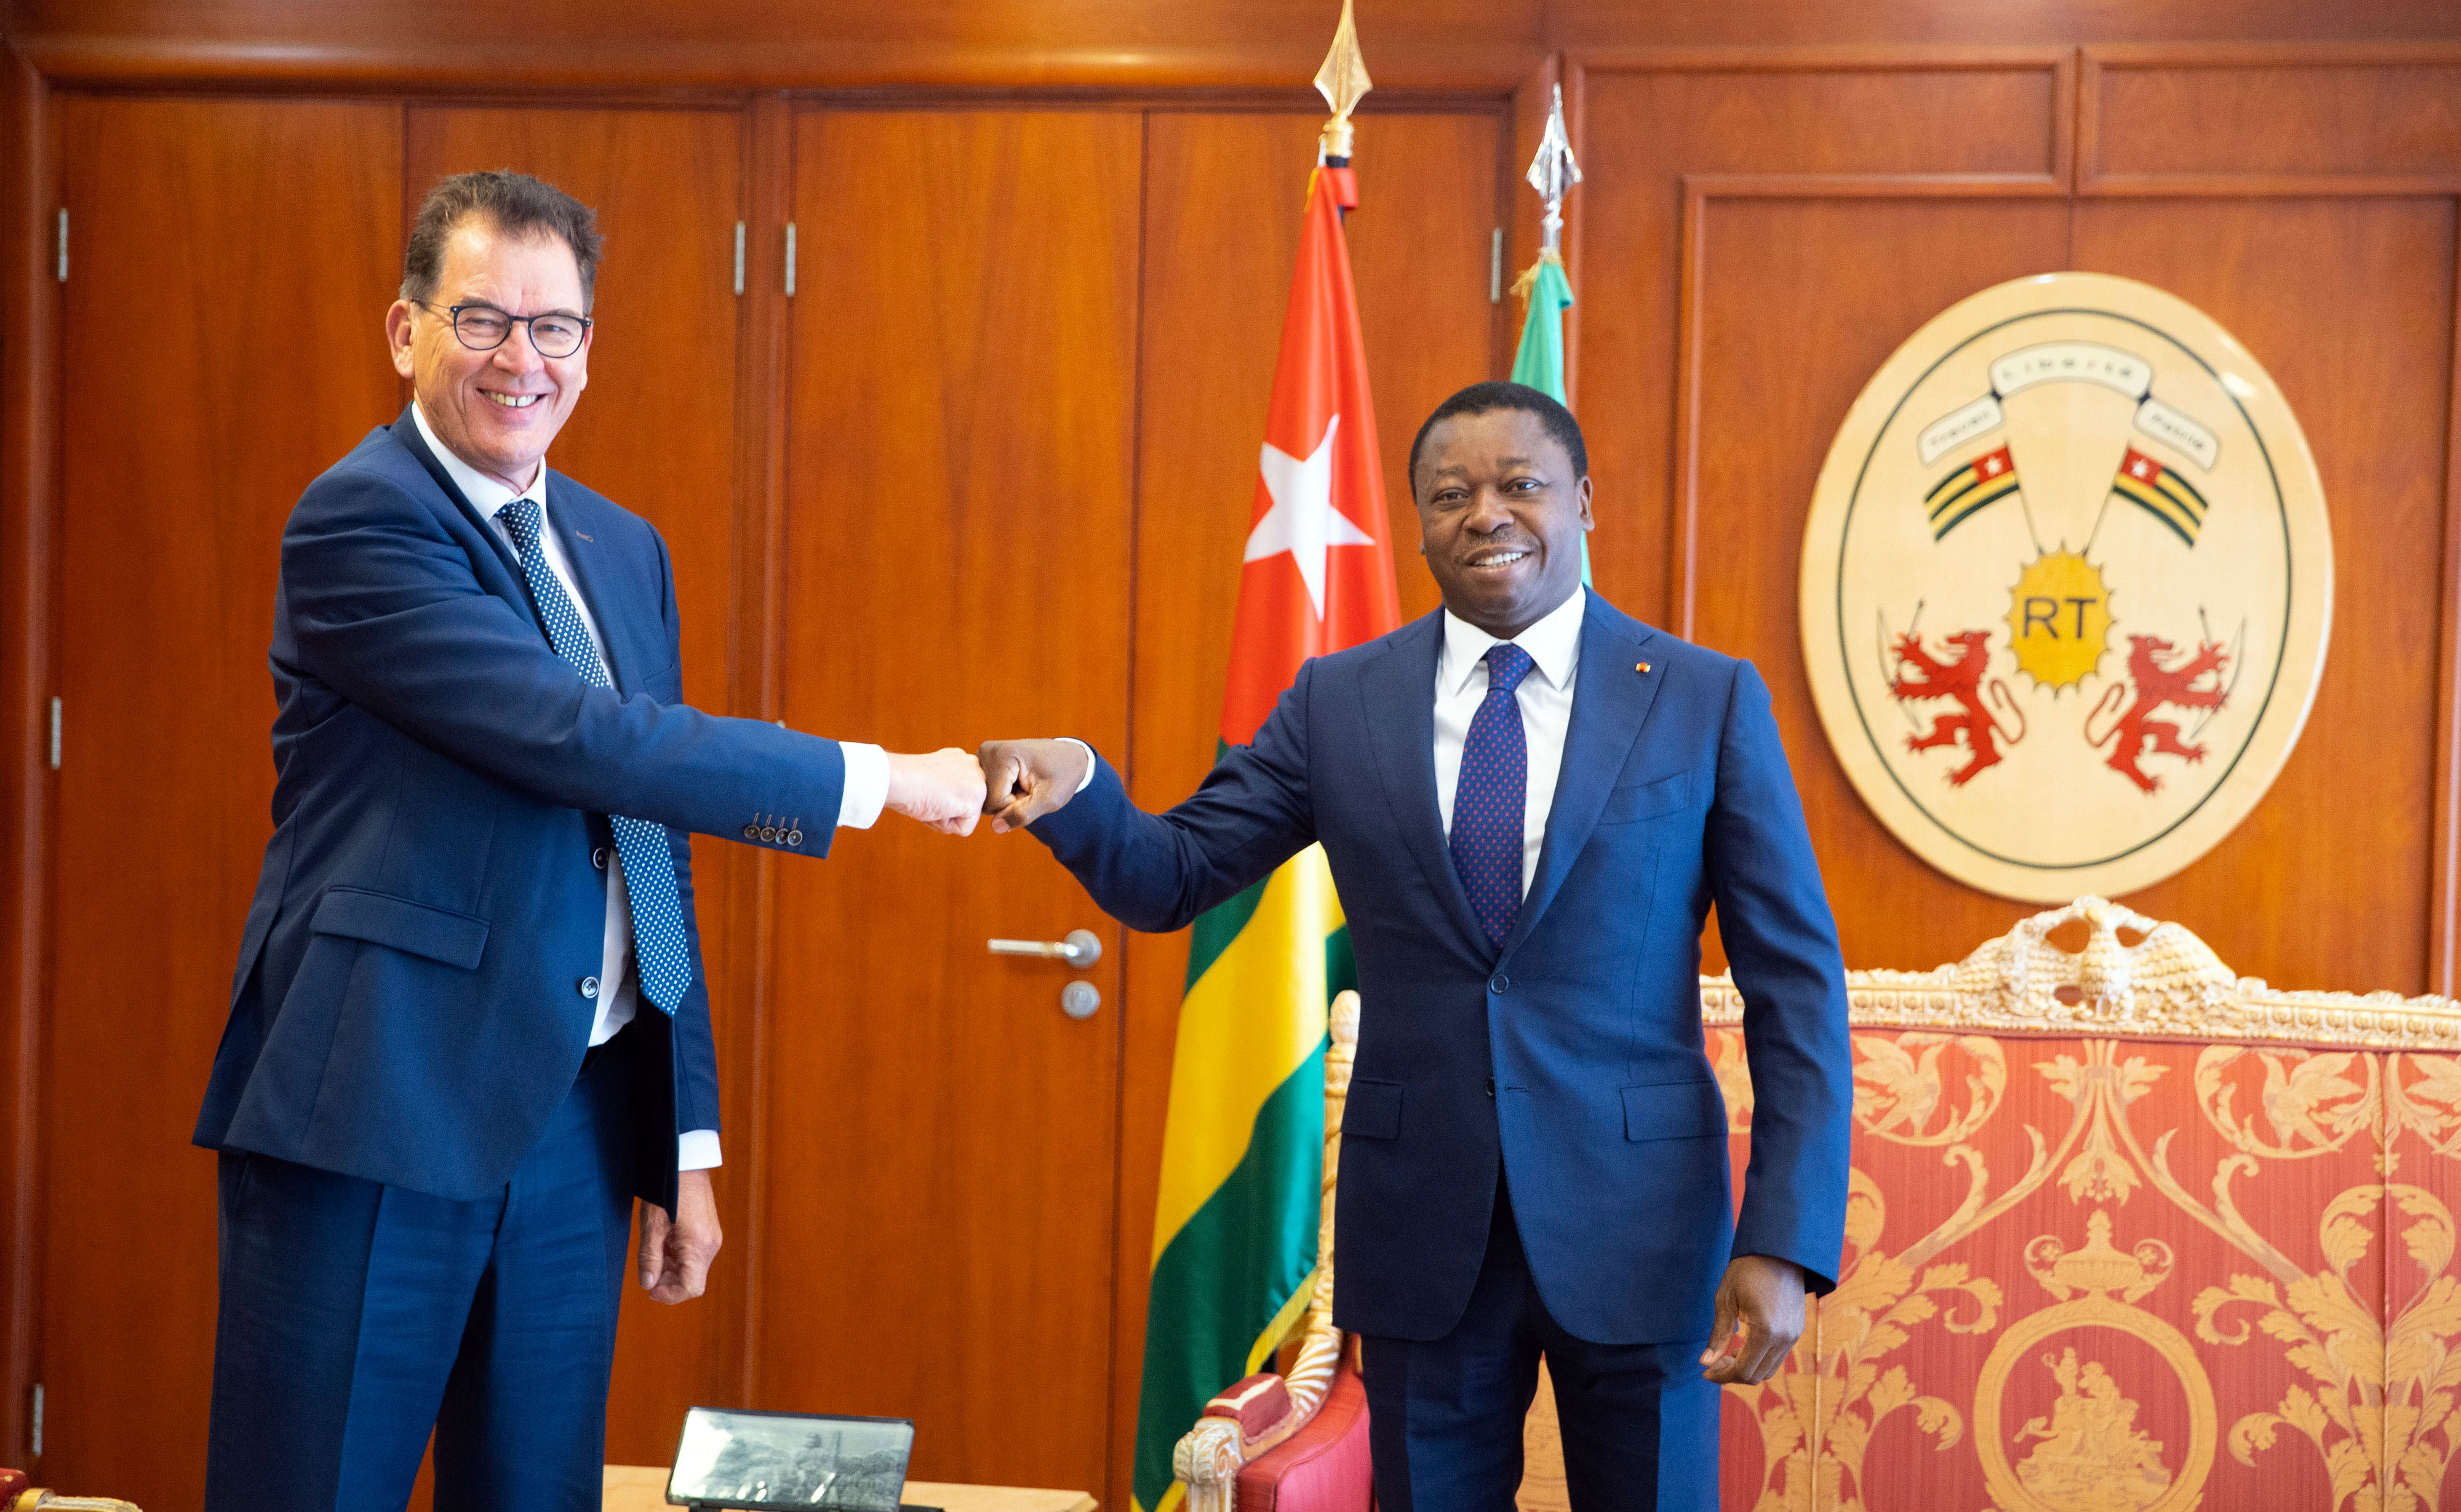 Federal Minister Gerd Müller meets Togolese President Fauré Gnassingbé in Lomé.